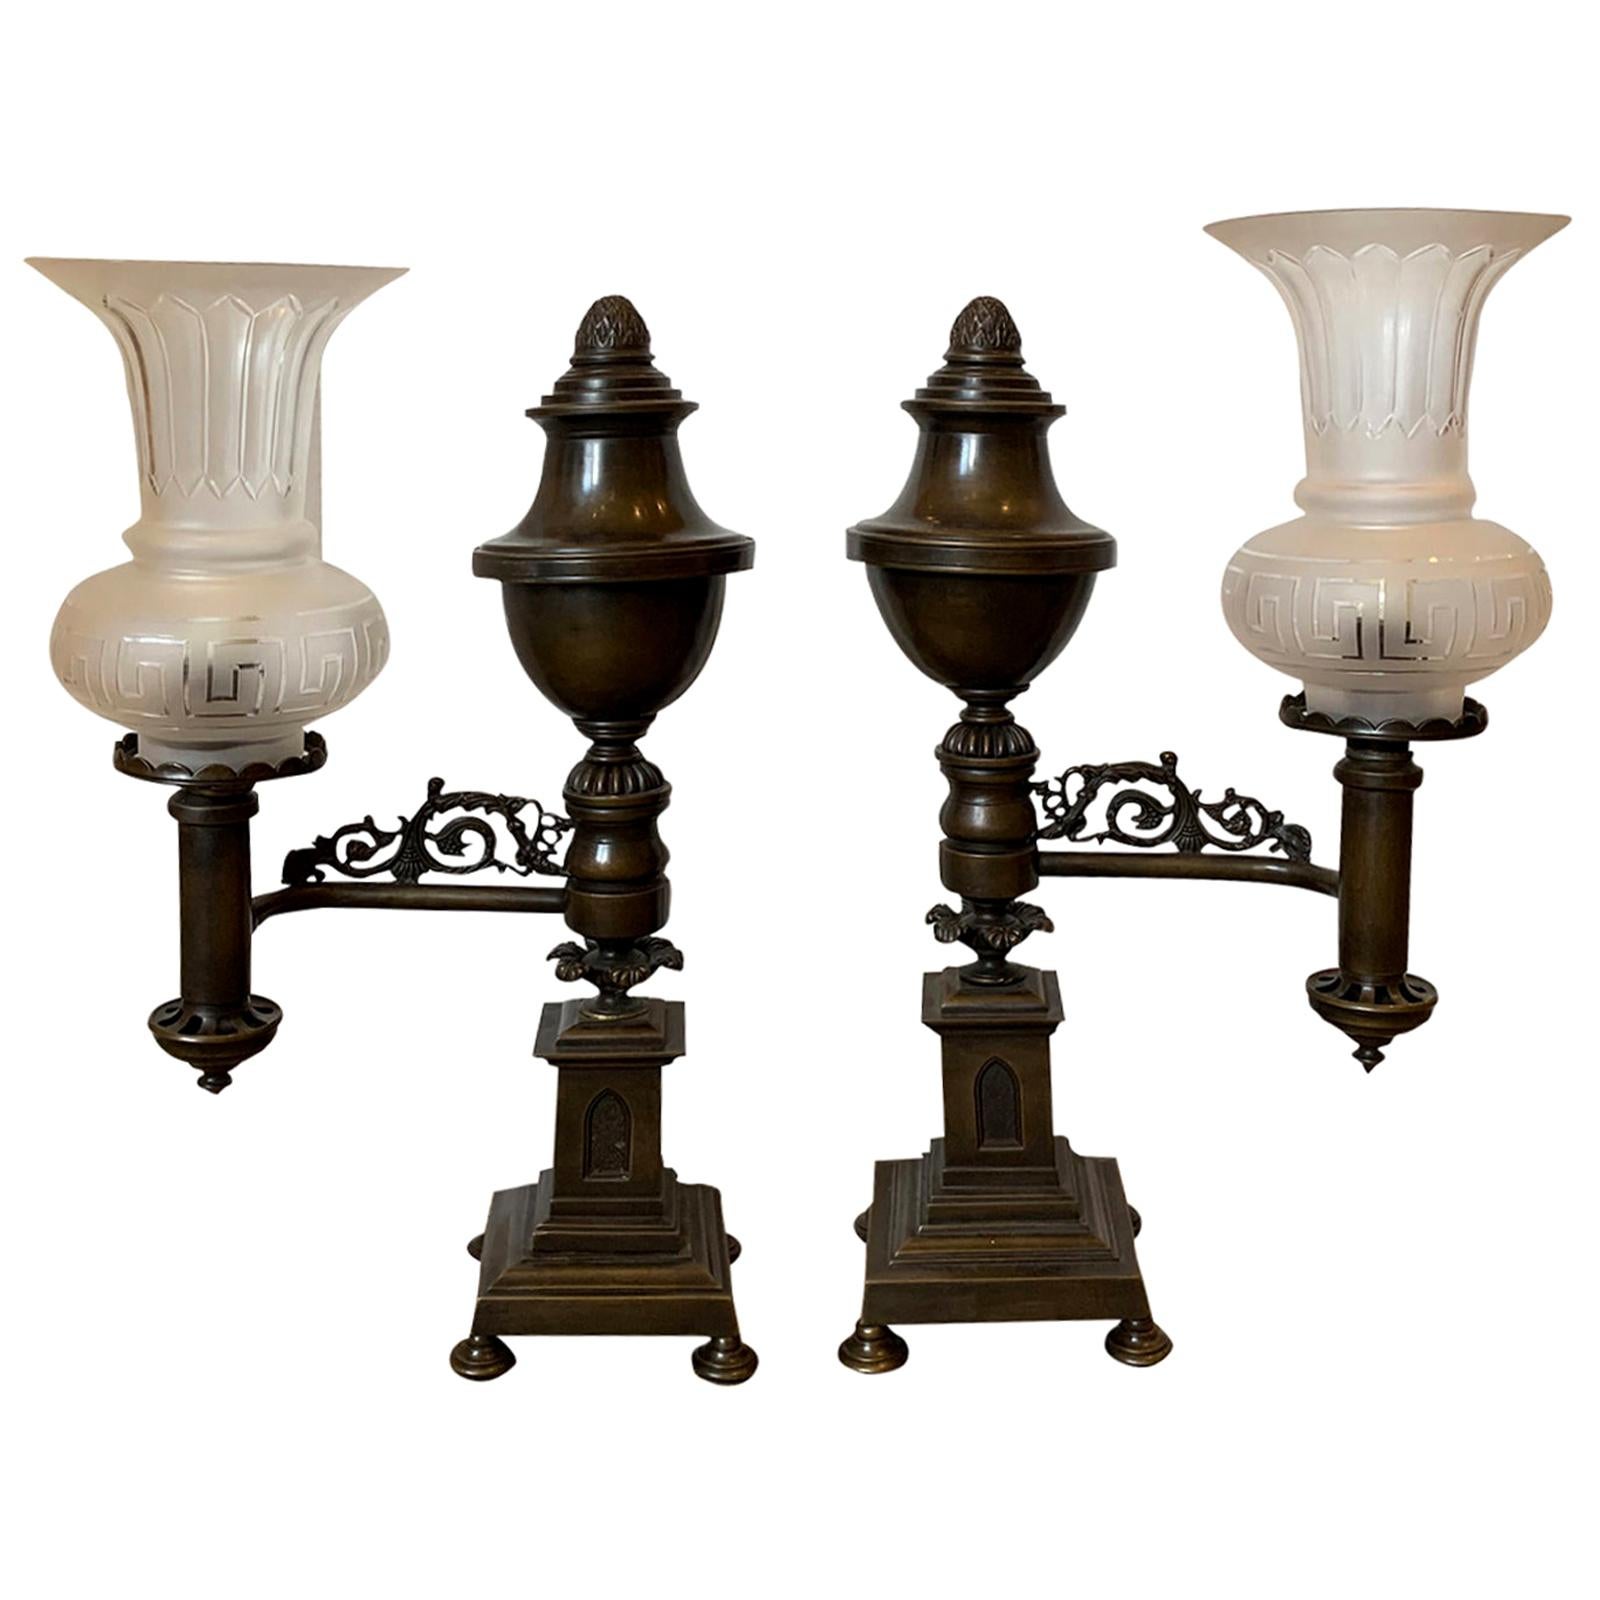 Pair of 19th-20th Century Bronze Argand Lamps with Frosted Globes, Acorn Finials